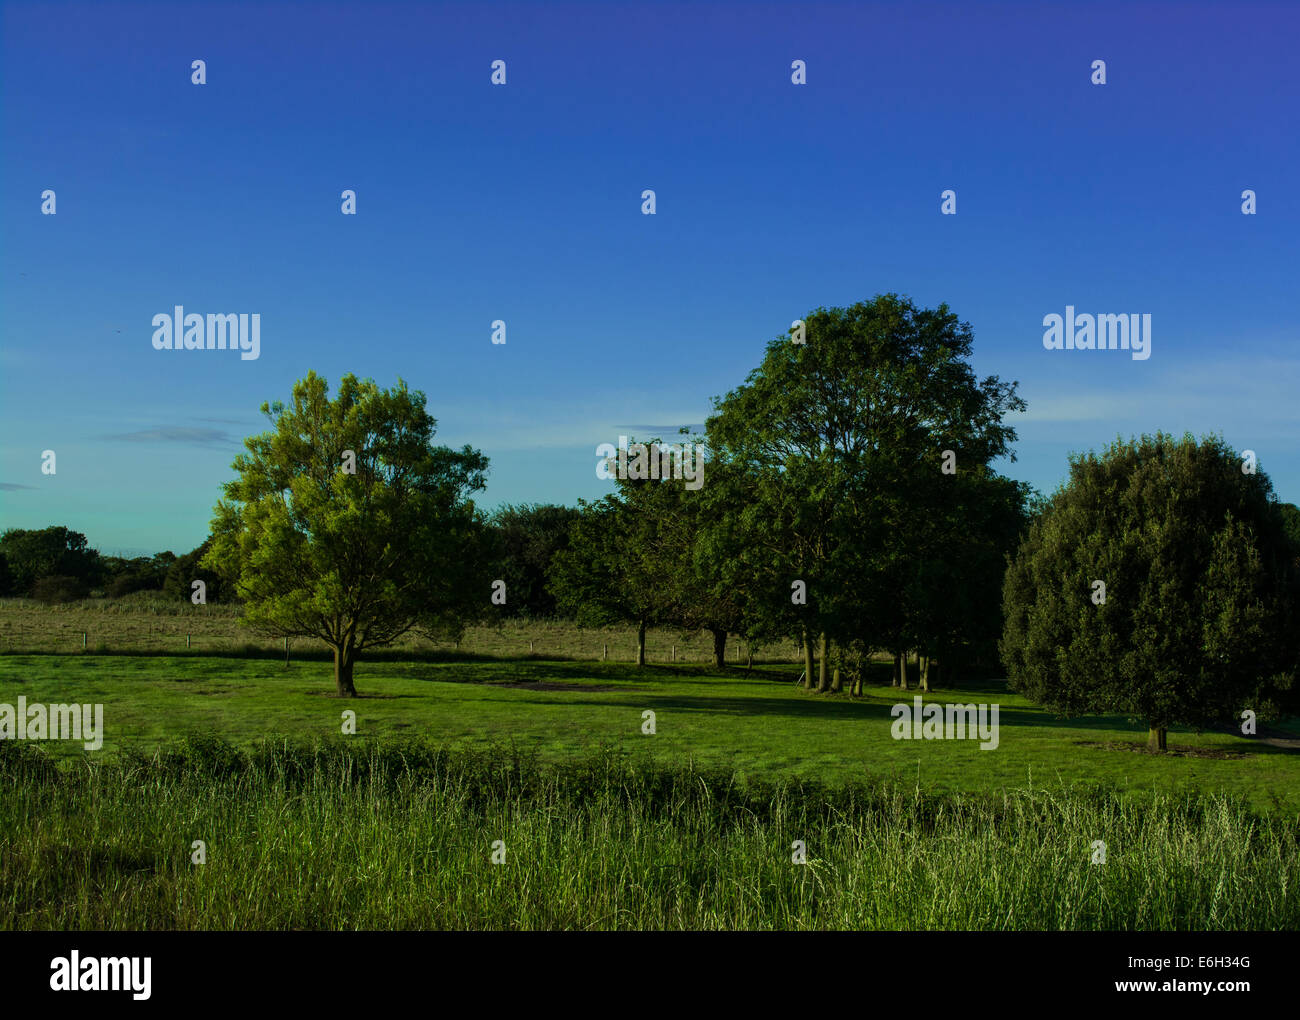 Grass and trees with blue sky Stock Photo